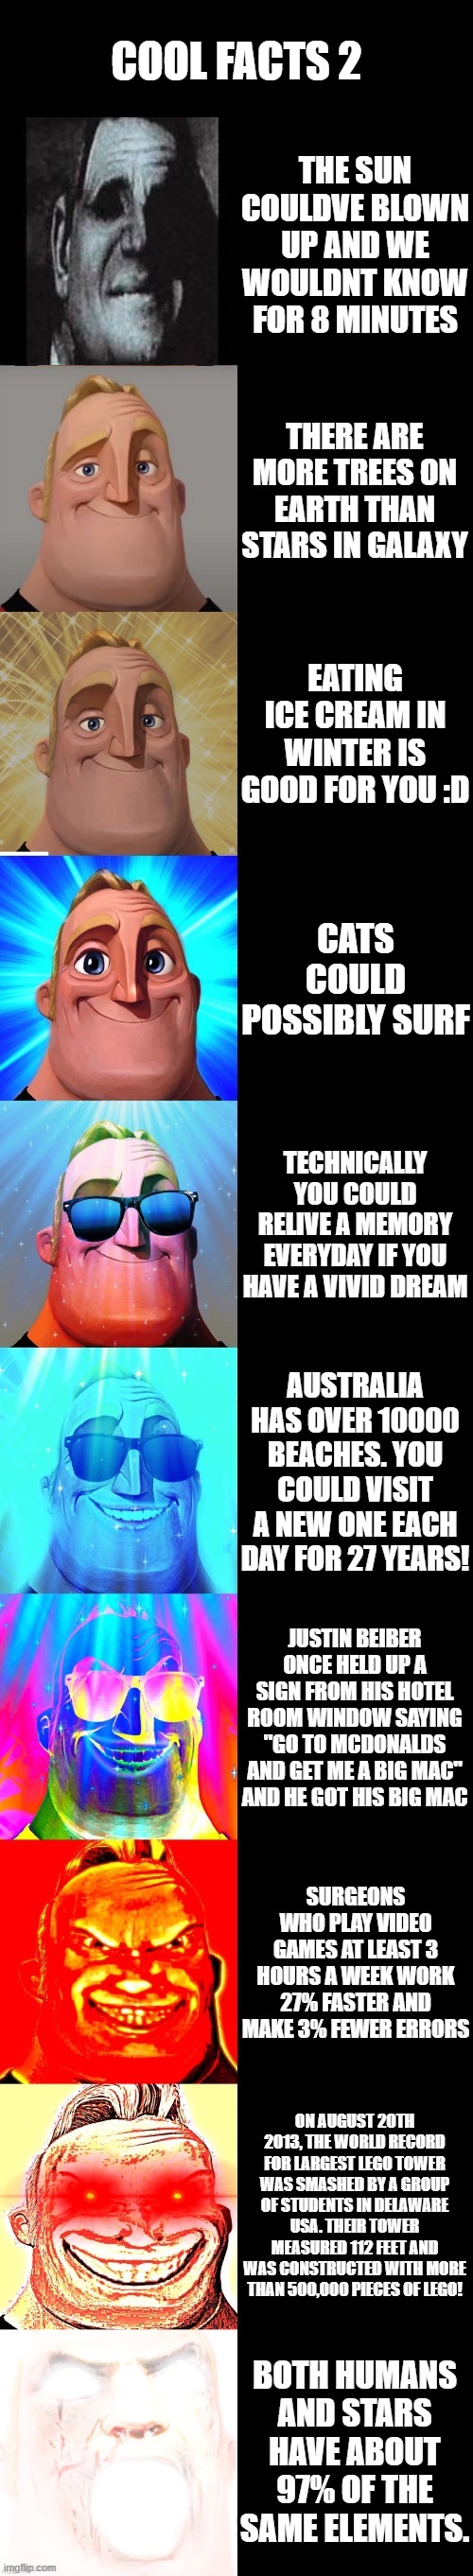 original by Tremendous Trash on Youtube | COOL FACTS 2; THE SUN COULDVE BLOWN UP AND WE WOULDNT KNOW FOR 8 MINUTES; THERE ARE MORE TREES ON EARTH THAN STARS IN GALAXY; EATING ICE CREAM IN WINTER IS GOOD FOR YOU :D; CATS COULD POSSIBLY SURF; TECHNICALLY YOU COULD RELIVE A MEMORY EVERYDAY IF YOU HAVE A VIVID DREAM; AUSTRALIA HAS OVER 10000 BEACHES. YOU COULD VISIT A NEW ONE EACH DAY FOR 27 YEARS! JUSTIN BEIBER ONCE HELD UP A SIGN FROM HIS HOTEL ROOM WINDOW SAYING "GO TO MCDONALDS AND GET ME A BIG MAC" AND HE GOT HIS BIG MAC; SURGEONS WHO PLAY VIDEO GAMES AT LEAST 3 HOURS A WEEK WORK 27% FASTER AND MAKE 3% FEWER ERRORS; ON AUGUST 20TH 2013, THE WORLD RECORD FOR LARGEST LEGO TOWER WAS SMASHED BY A GROUP OF STUDENTS IN DELAWARE USA. THEIR TOWER MEASURED 112 FEET AND WAS CONSTRUCTED WITH MORE THAN 500,000 PIECES OF LEGO! BOTH HUMANS AND STARS HAVE ABOUT 97% OF THE SAME ELEMENTS. | image tagged in mr incredible becoming canny,cool,facts,memes,wow,stop reading the tags | made w/ Imgflip meme maker